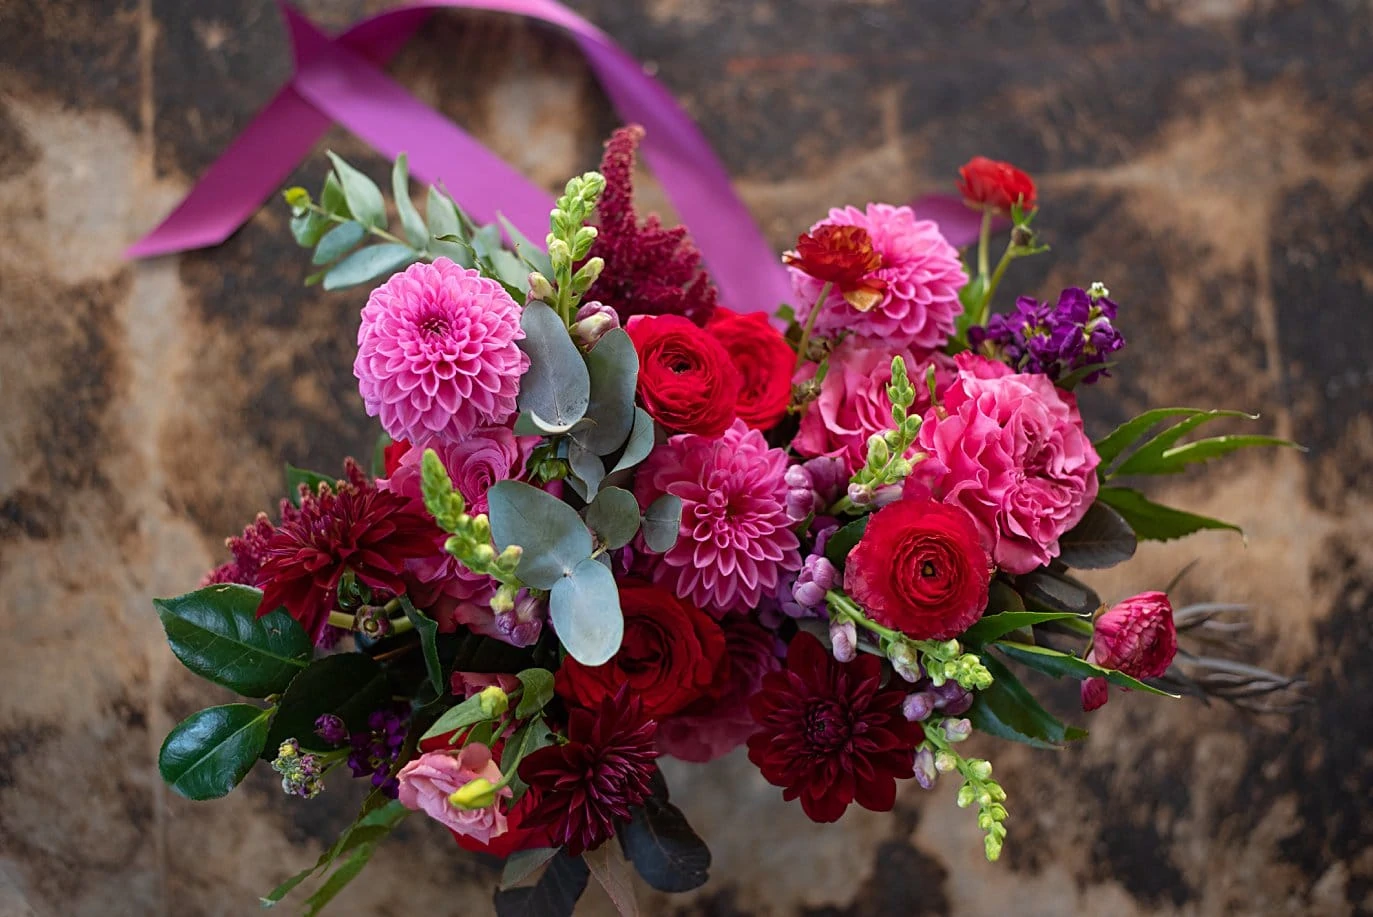 lush and colorful wedding bouquet with pinks, reds, and greens